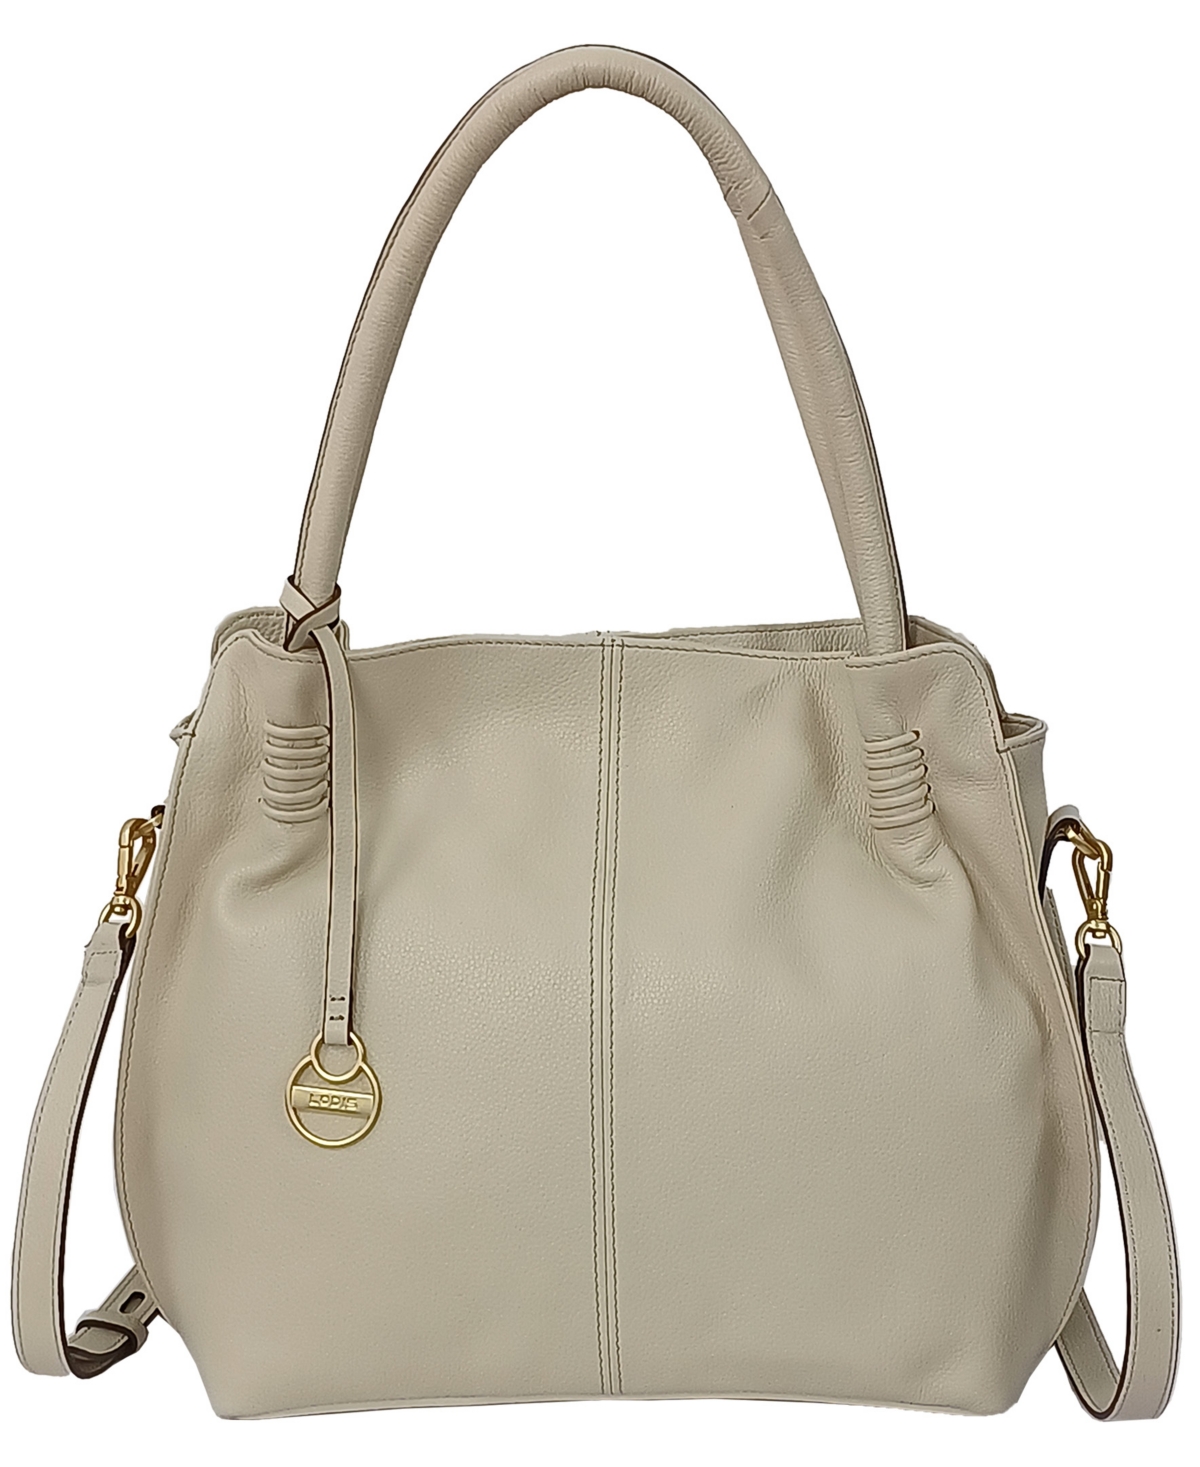 Lodis Montauk Leather Tote In Sand